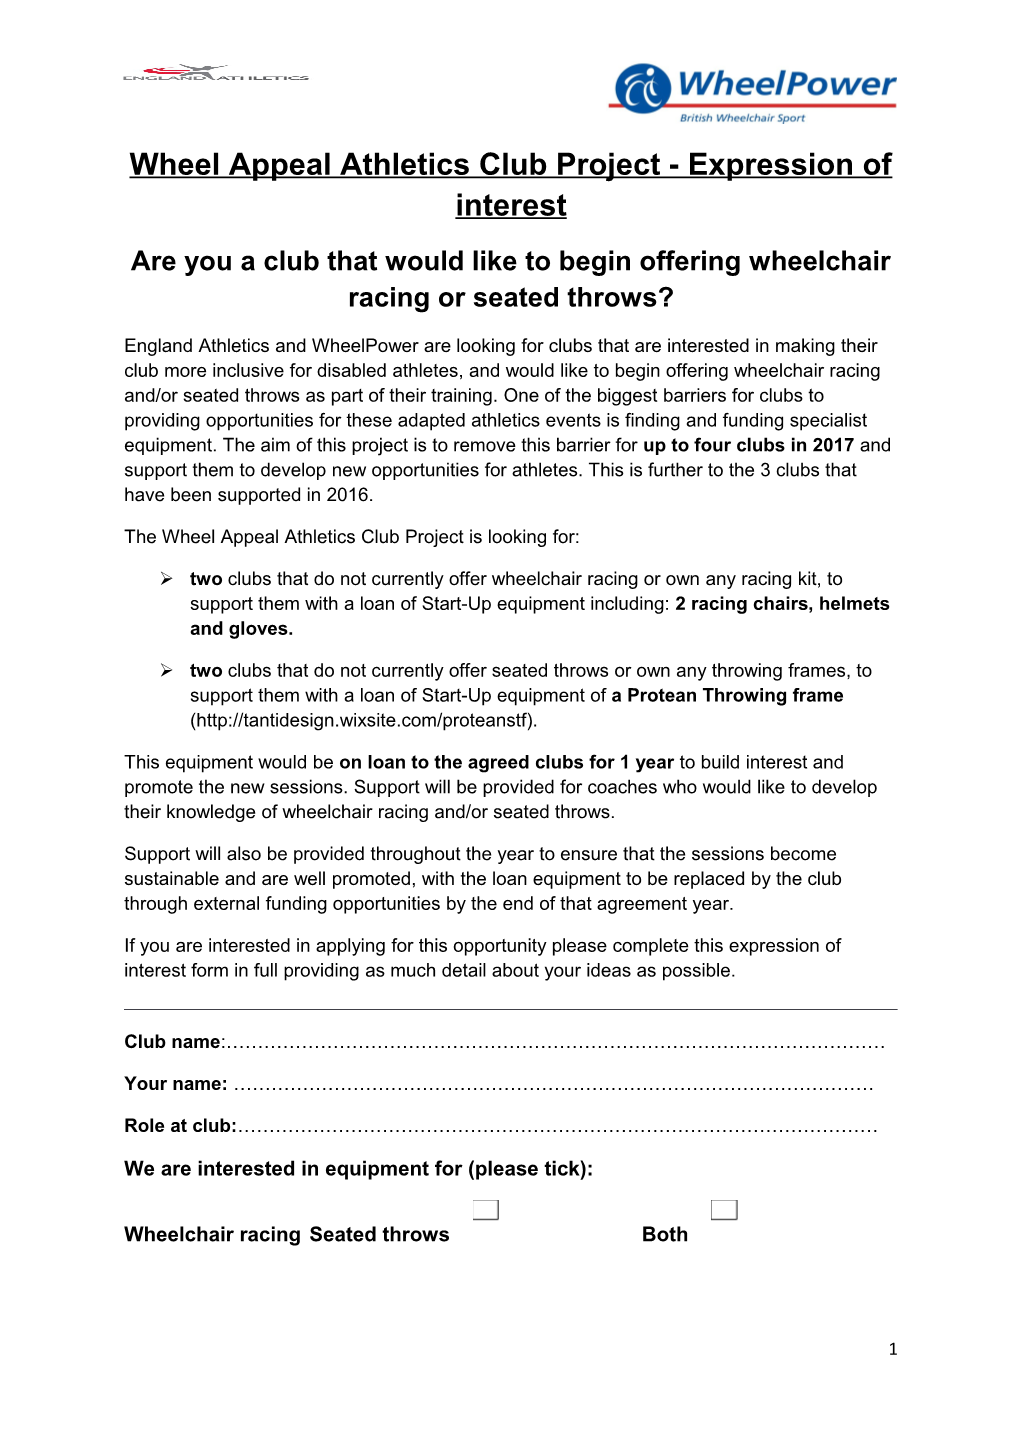 Wheel Appeal Athletics Club Project - Expression of Interest